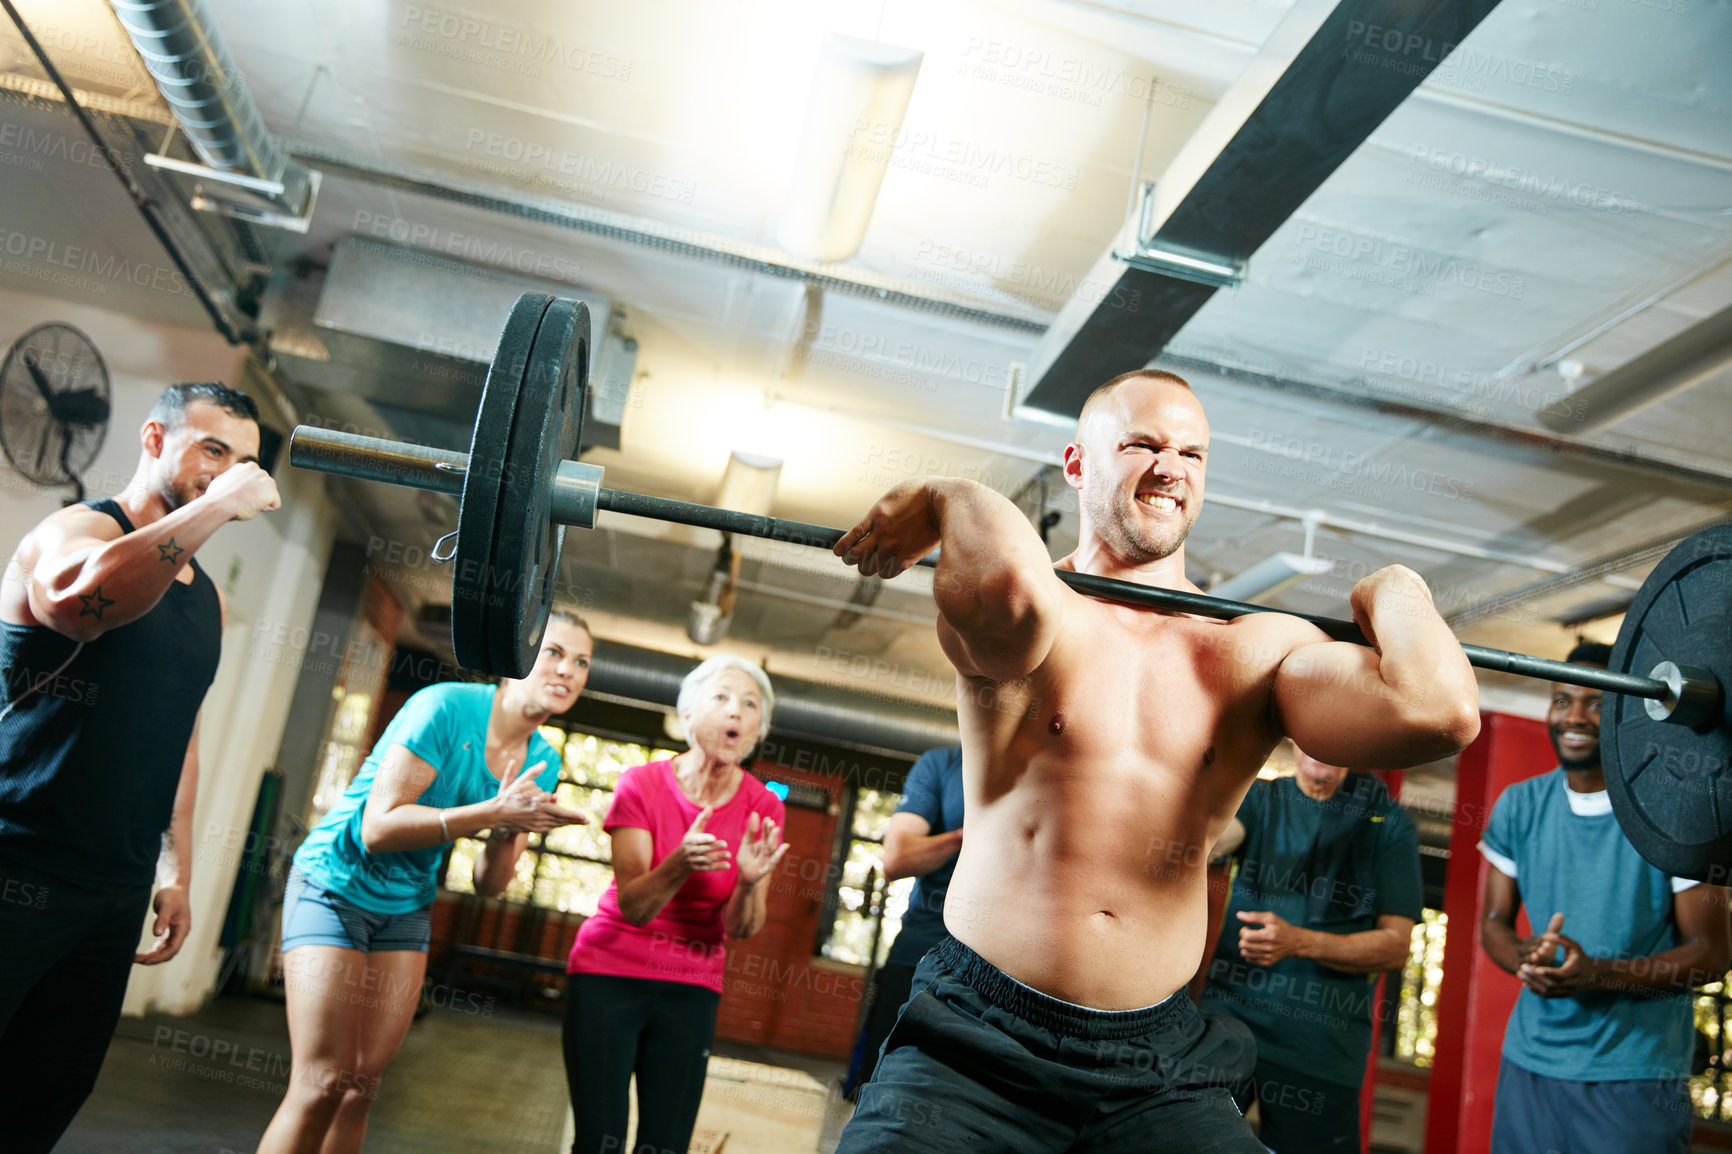 Buy stock photo Shot of a man lifting weights while a group of people in the background watch on